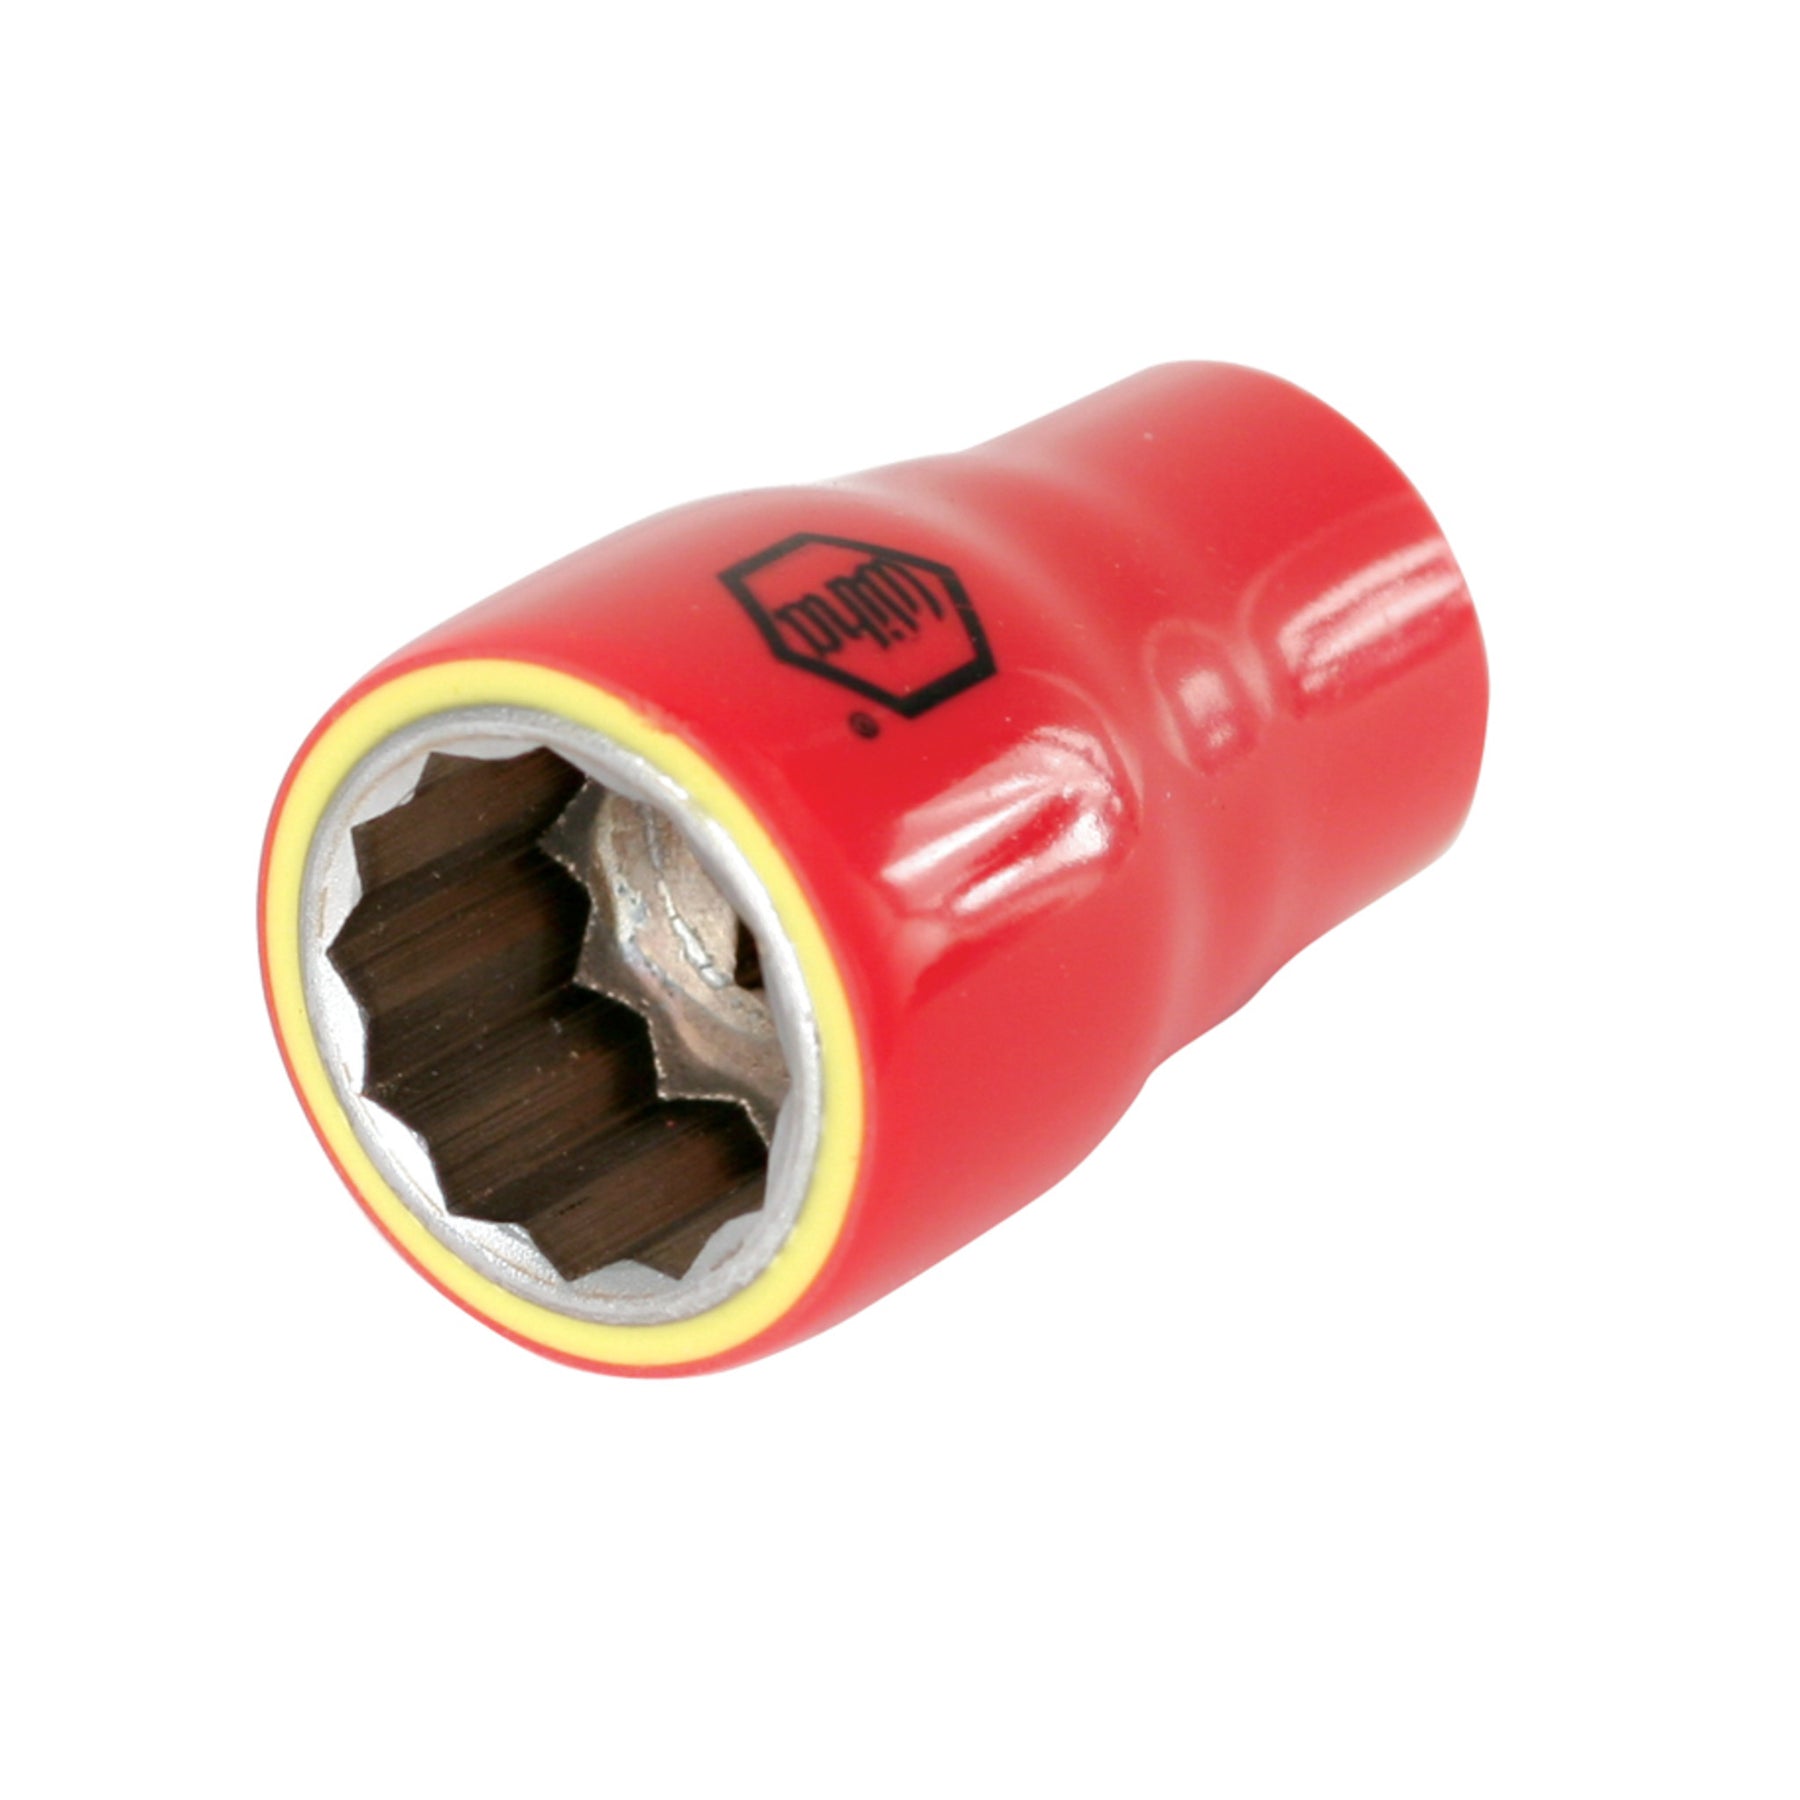 Insulated Socket 1/2" Drive 5/16"